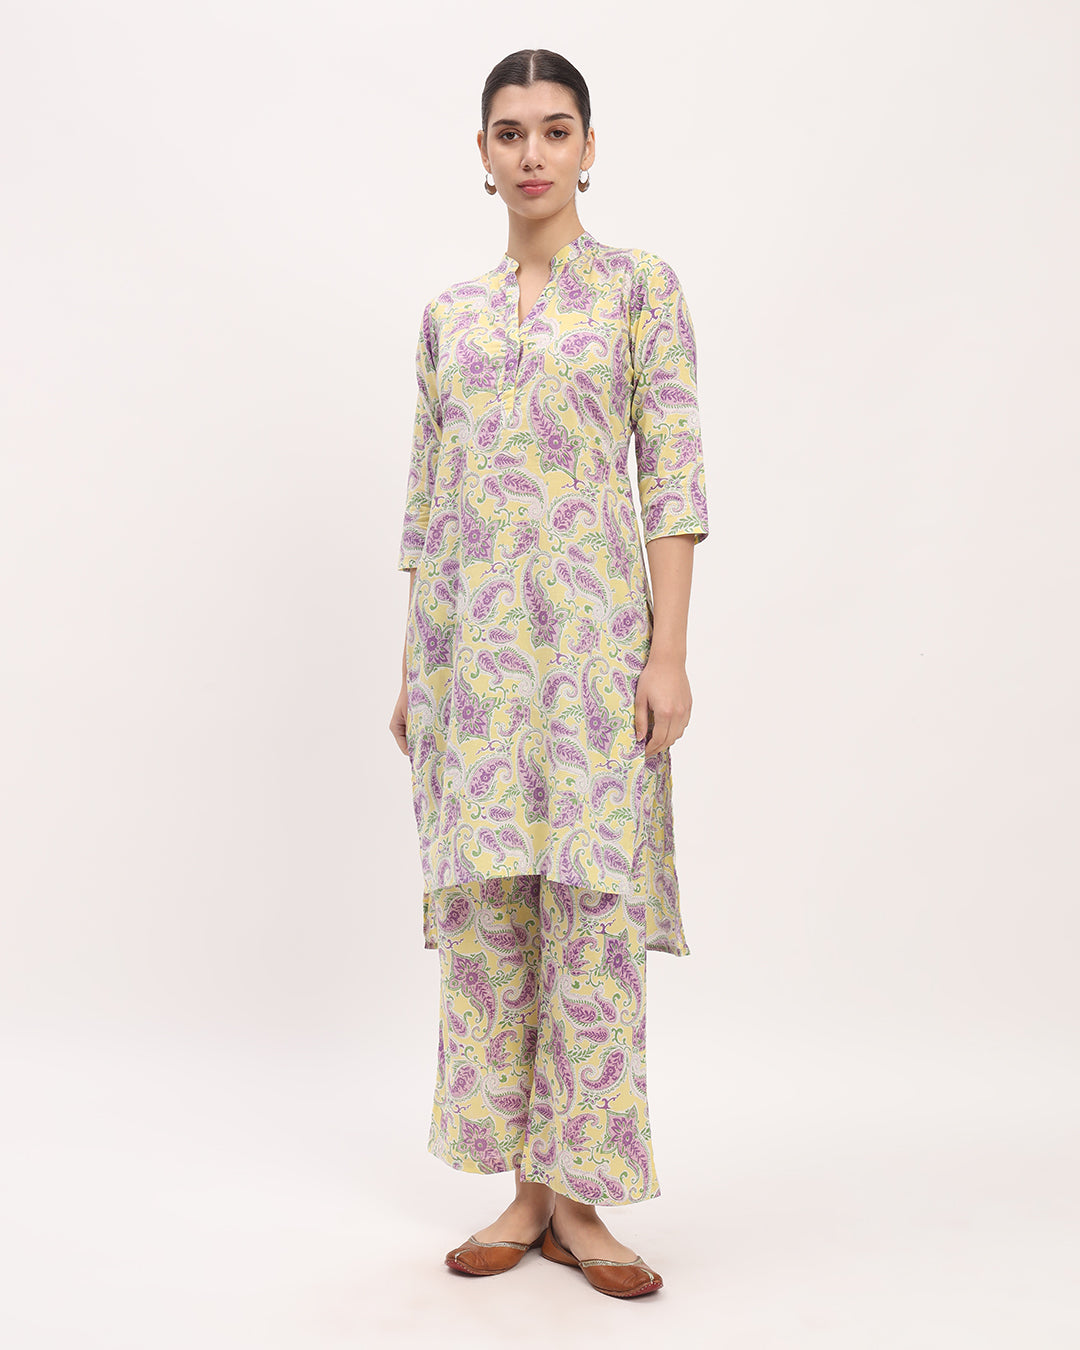 Combo: Golden Blossom & Lavender Paisley High-Low Printed Kurta (Without Bottoms)